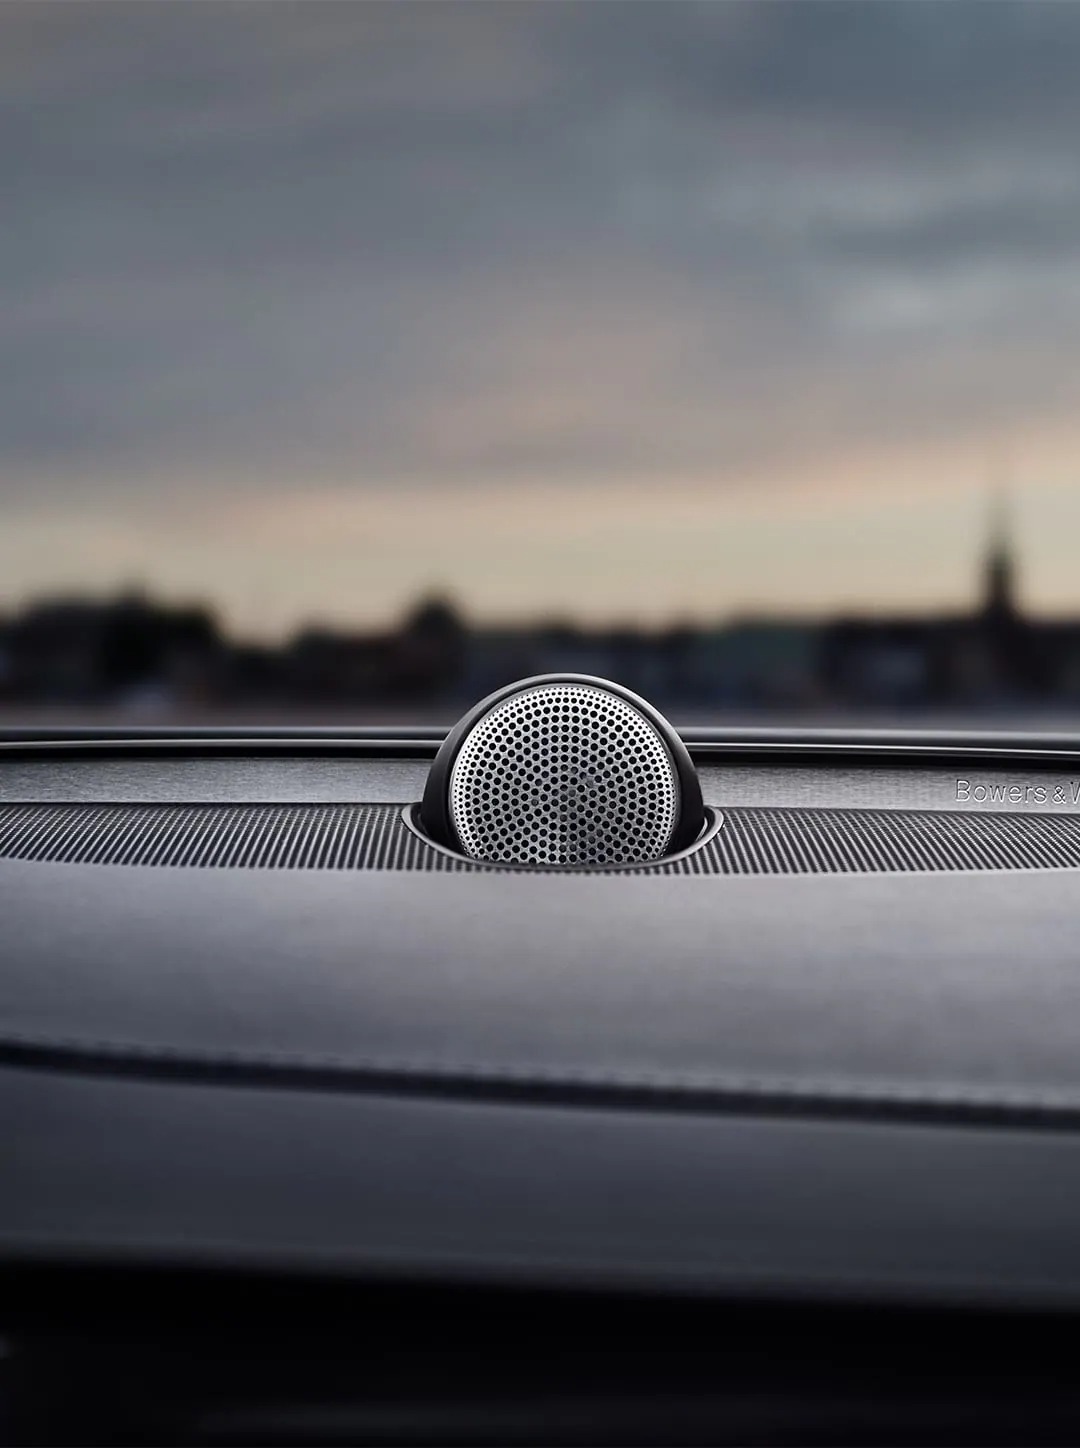 S90��� ������������ ������ ��� ��������� Bowers & Wilkins��� ������������ ���������